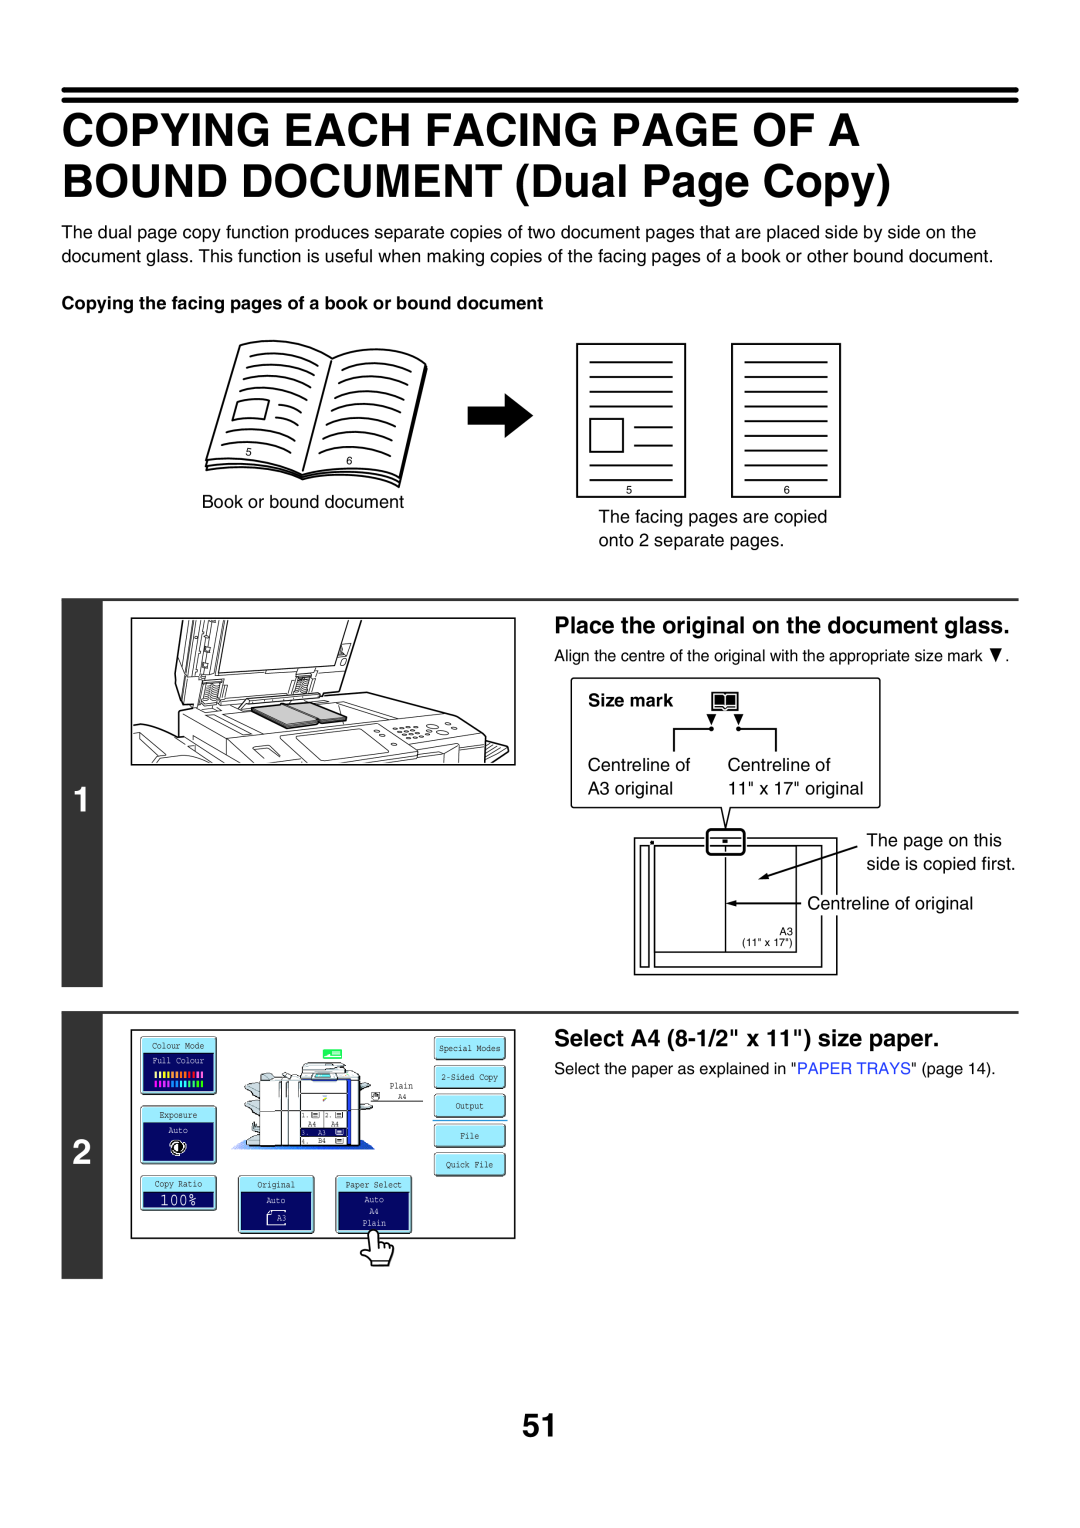 Sharp MX-6200N COPYING EACH FACING PAGE OF A BOUND DOCUMENT Dual Page Copy, Place the original on the document glass, 100% 